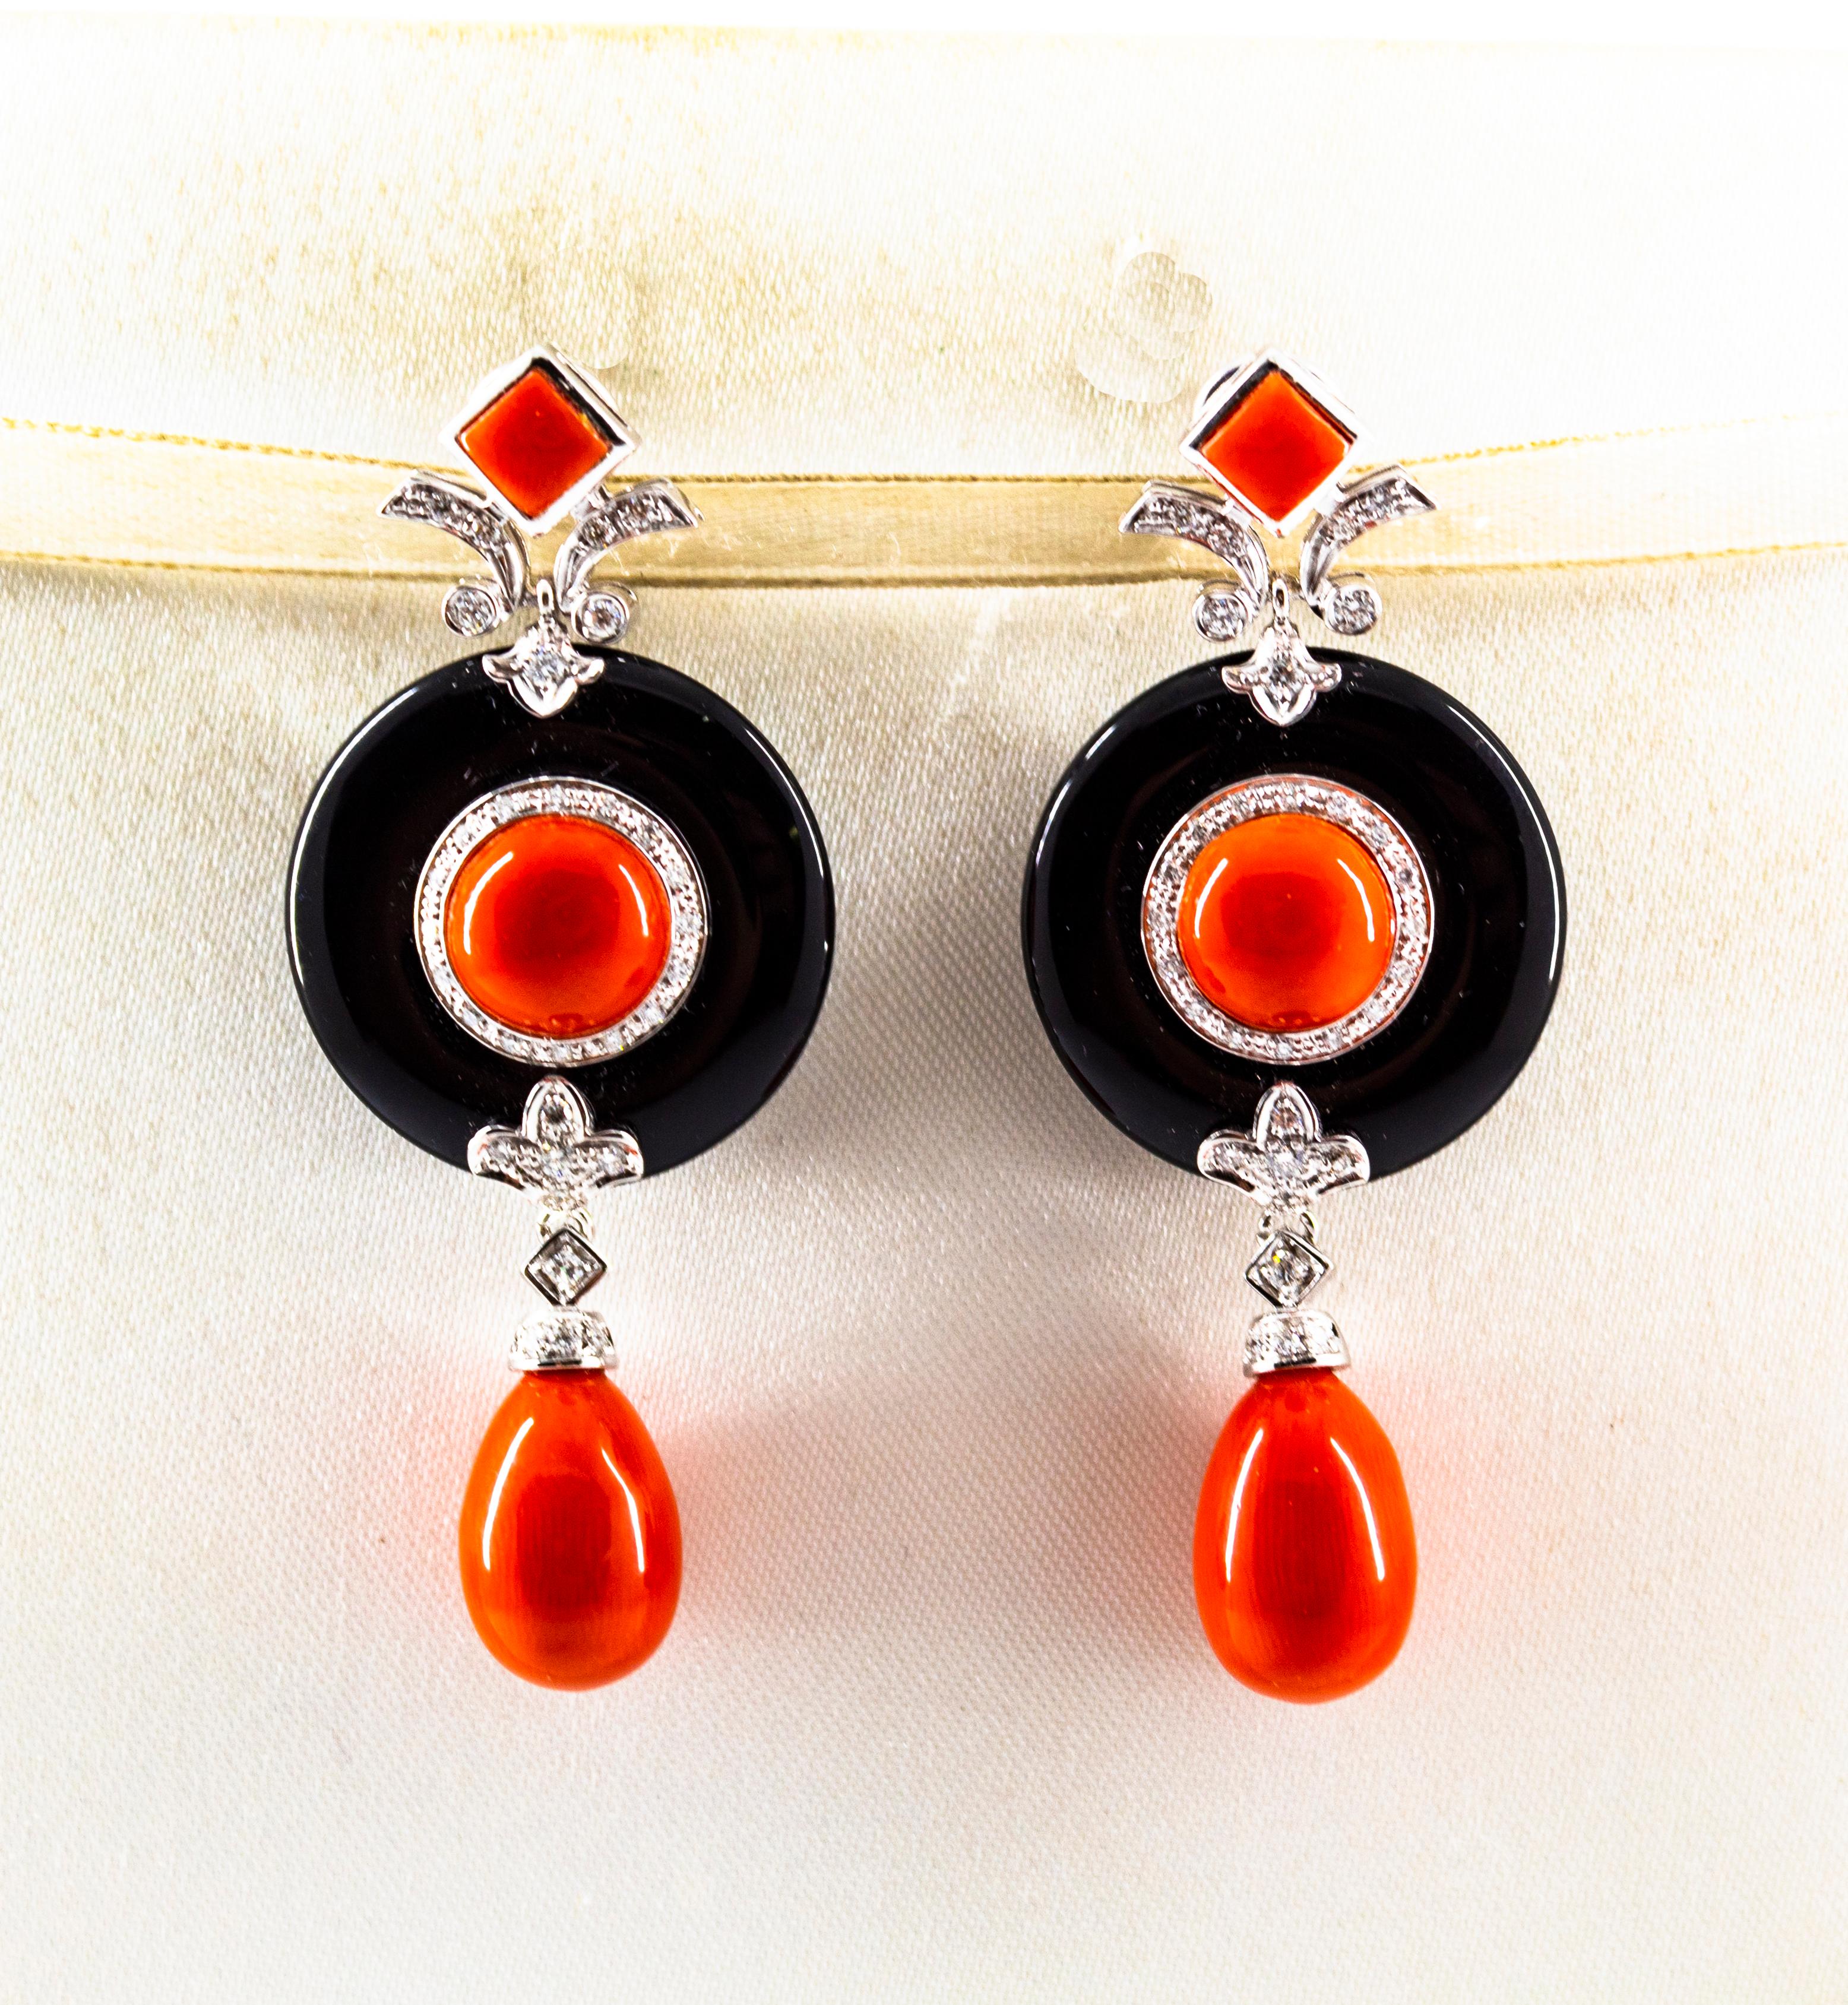 These Clip-On Earrings are made of 14K White Gold with 18K White Gold Clips.
These Earrings have 0.70 Carats of White Diamonds.
These Earrings have Red Mediterranean (Sardinia, Italy) Coral.
These Earrings have also Onyx.
All our Earrings have pins